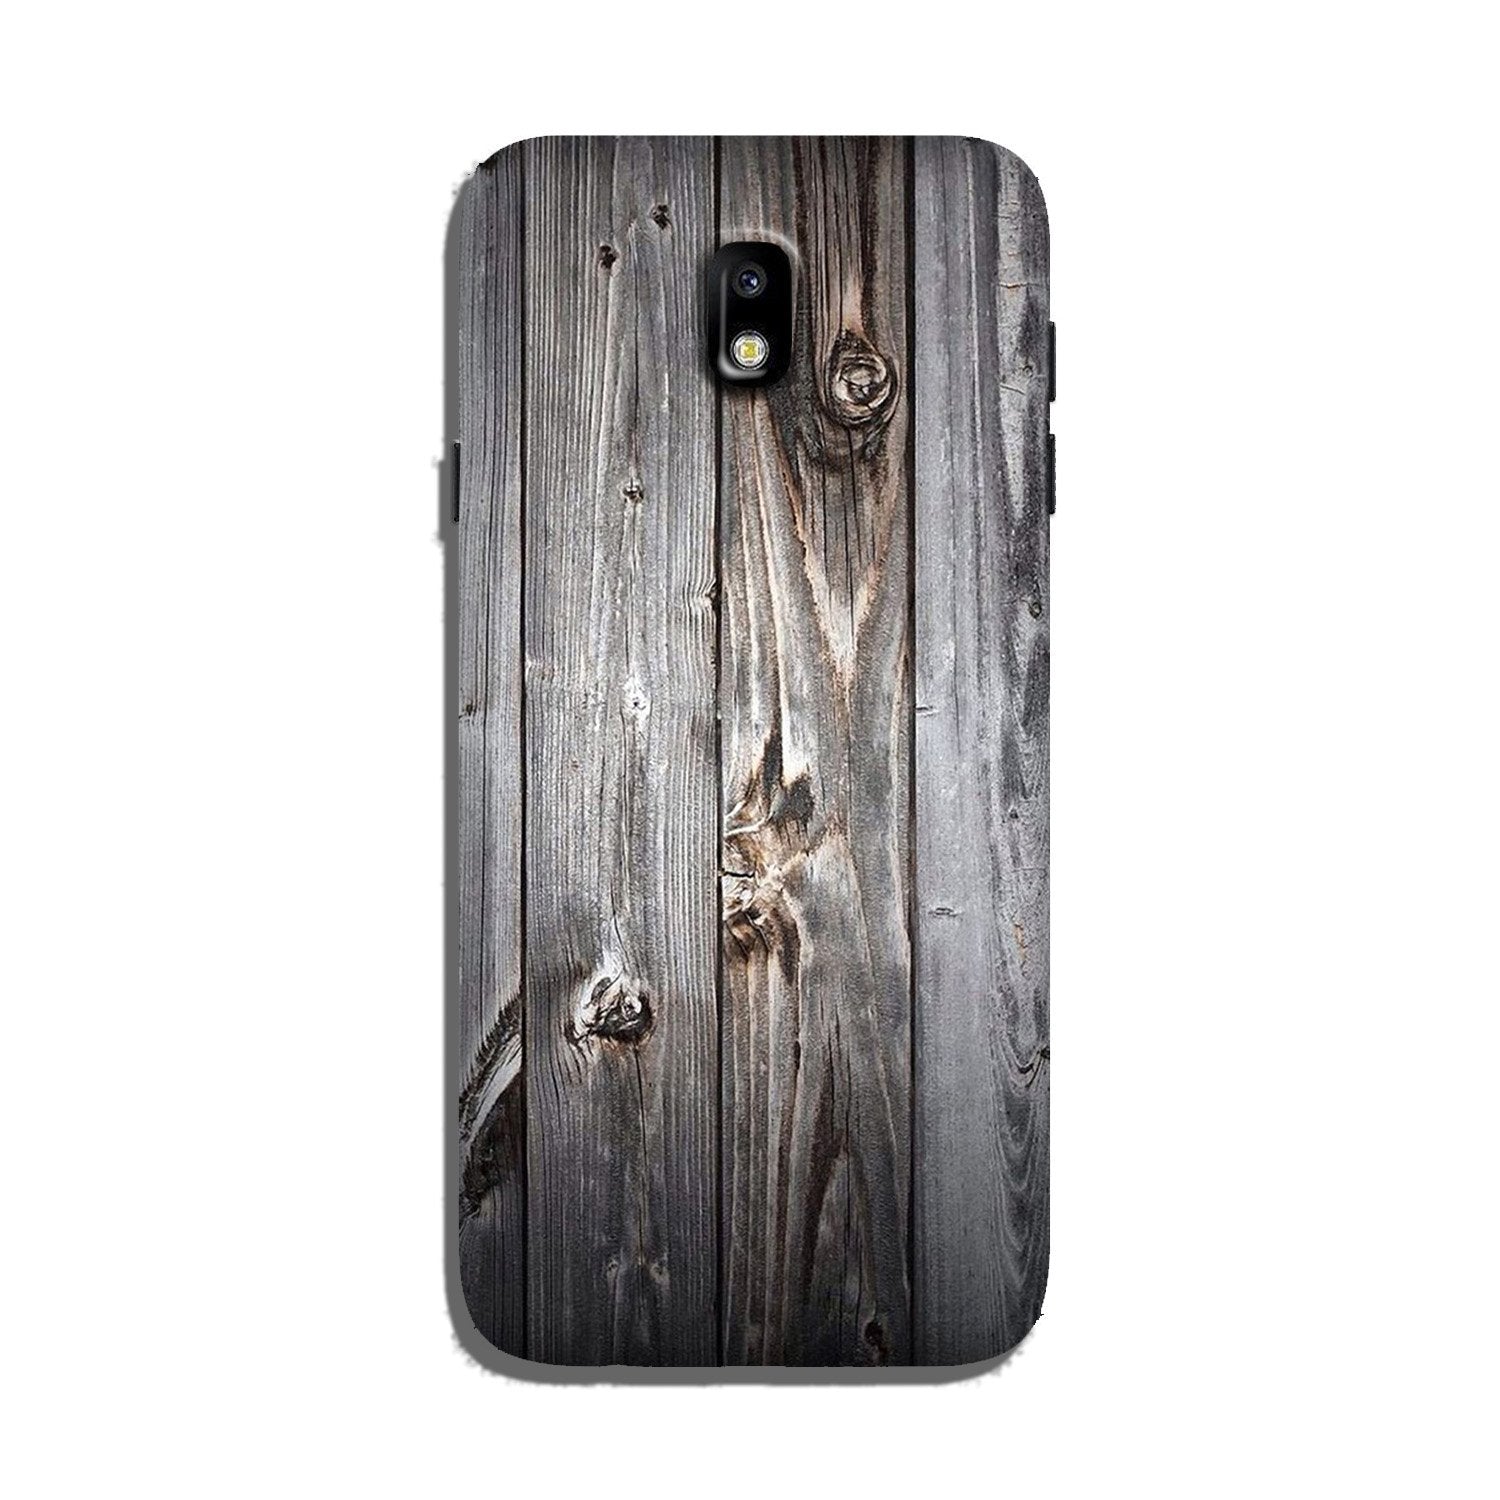 Wooden Look Case for Galaxy J5 Pro(Design - 114)